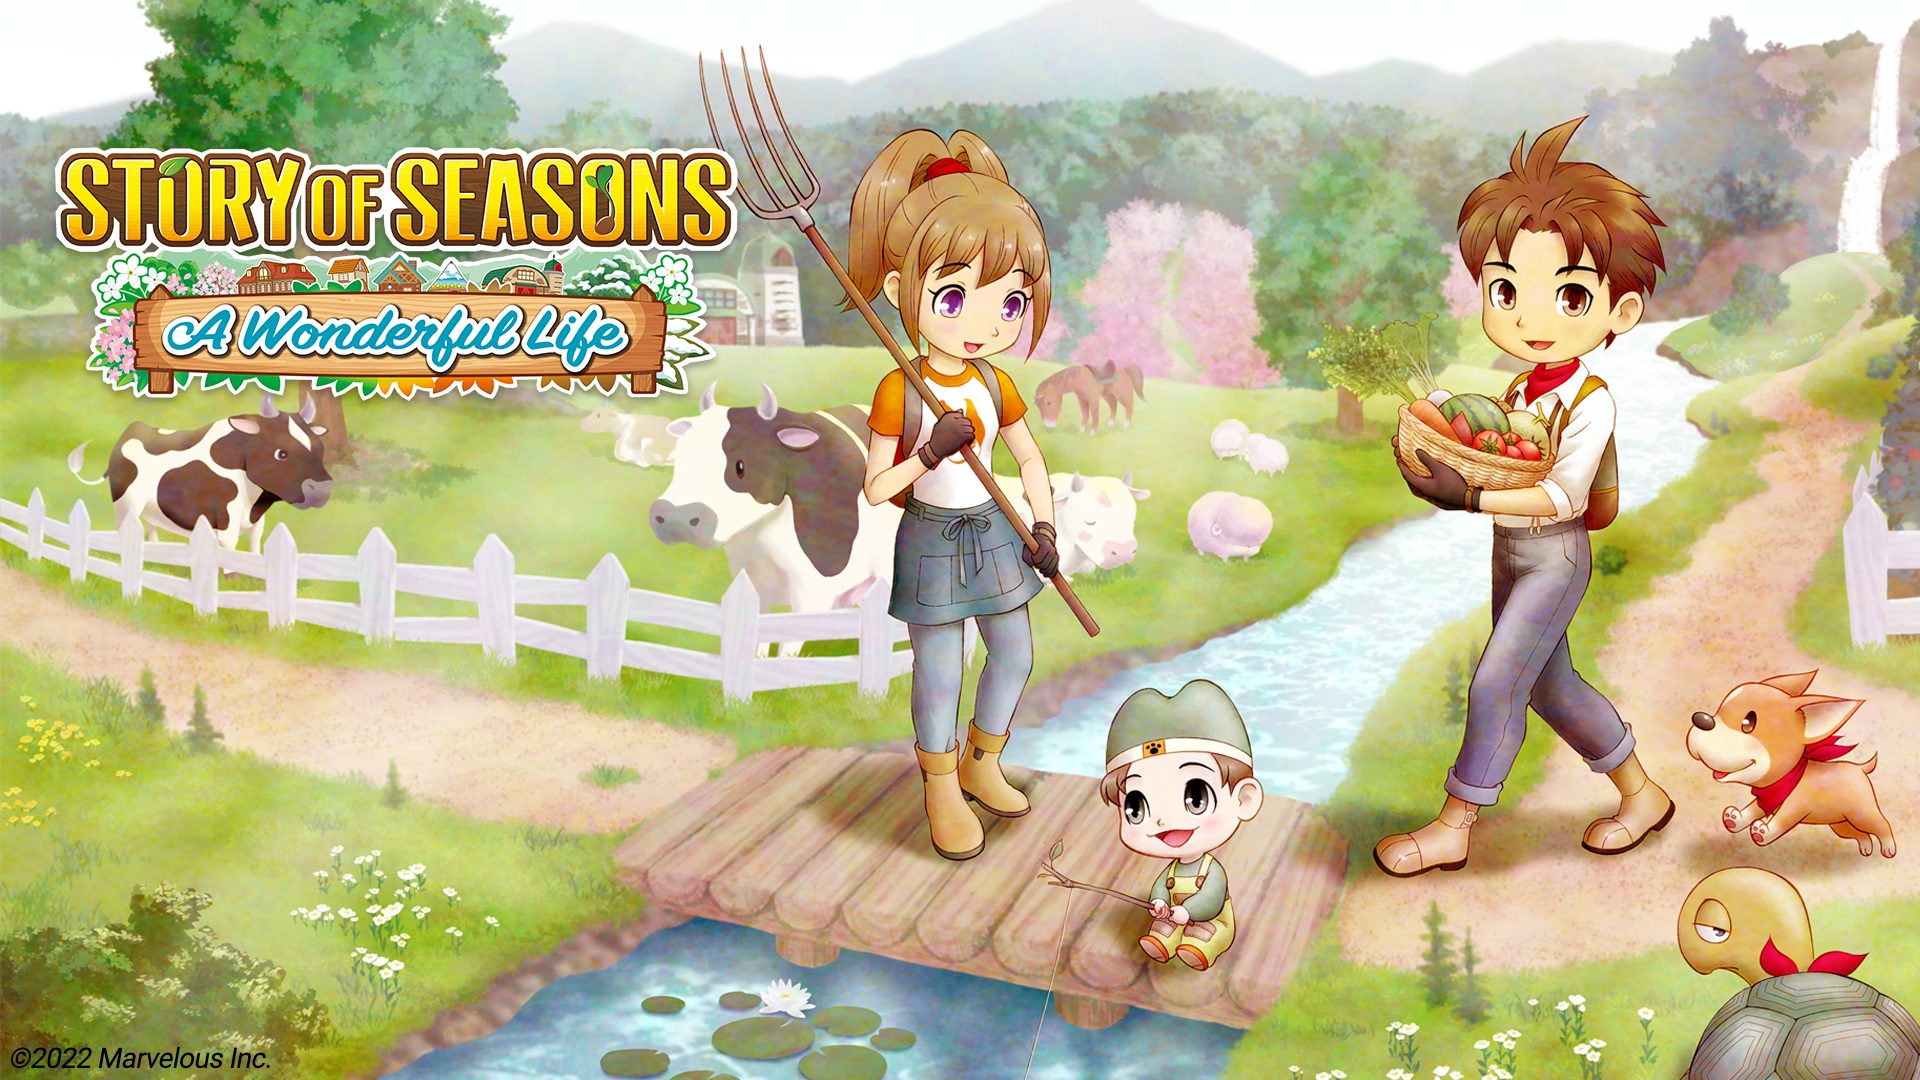 Story of Seasons: A Wonderful Life remakes a farming classic